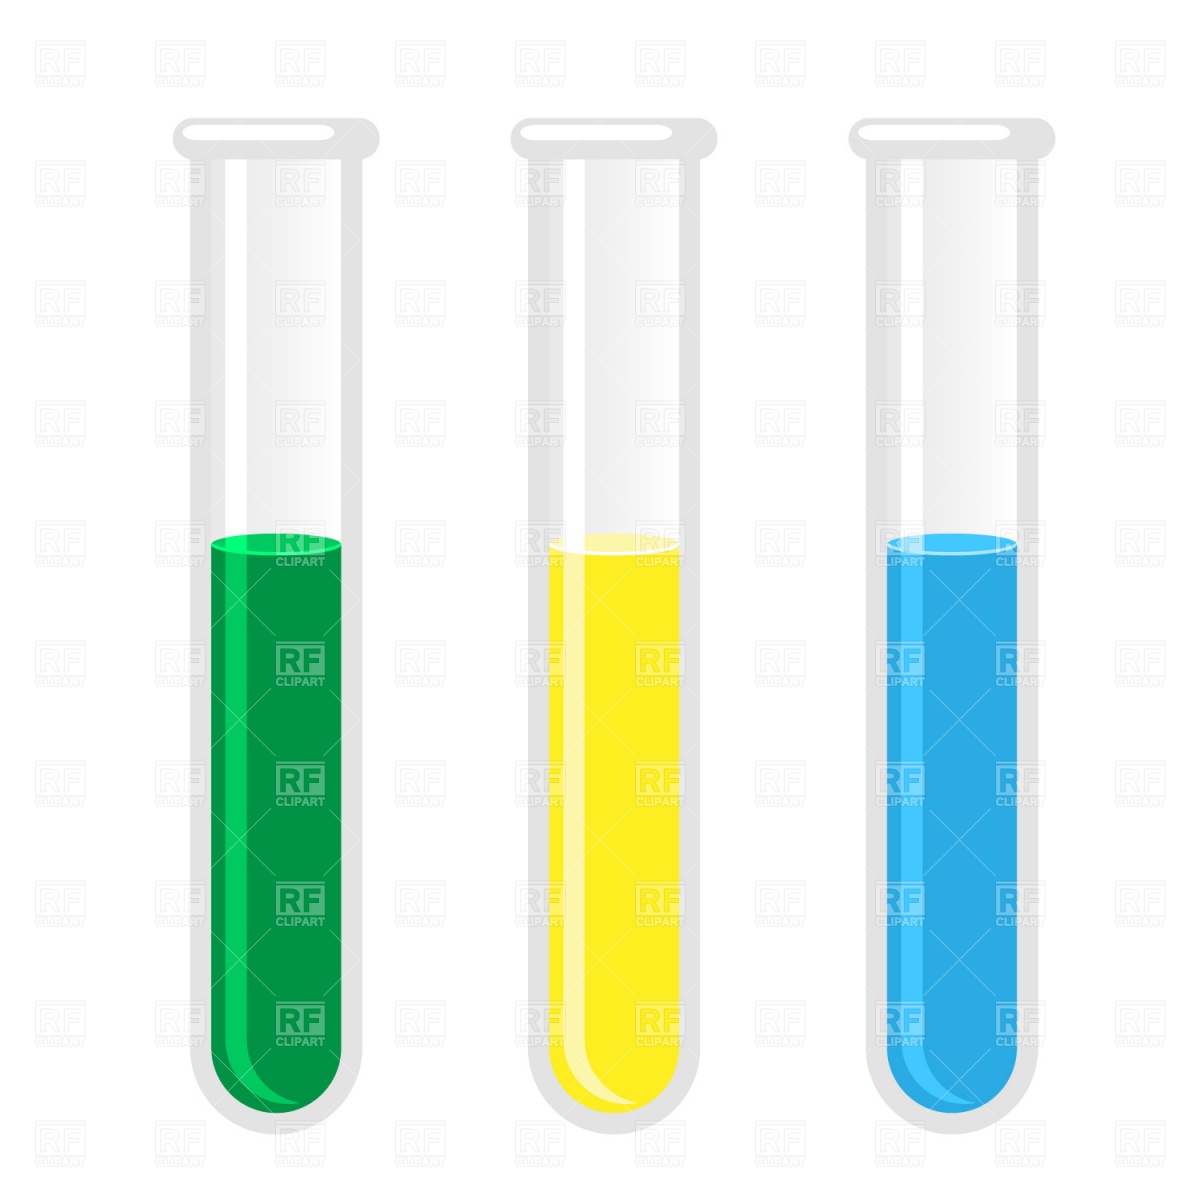 Test Tube Images   Clipart Best